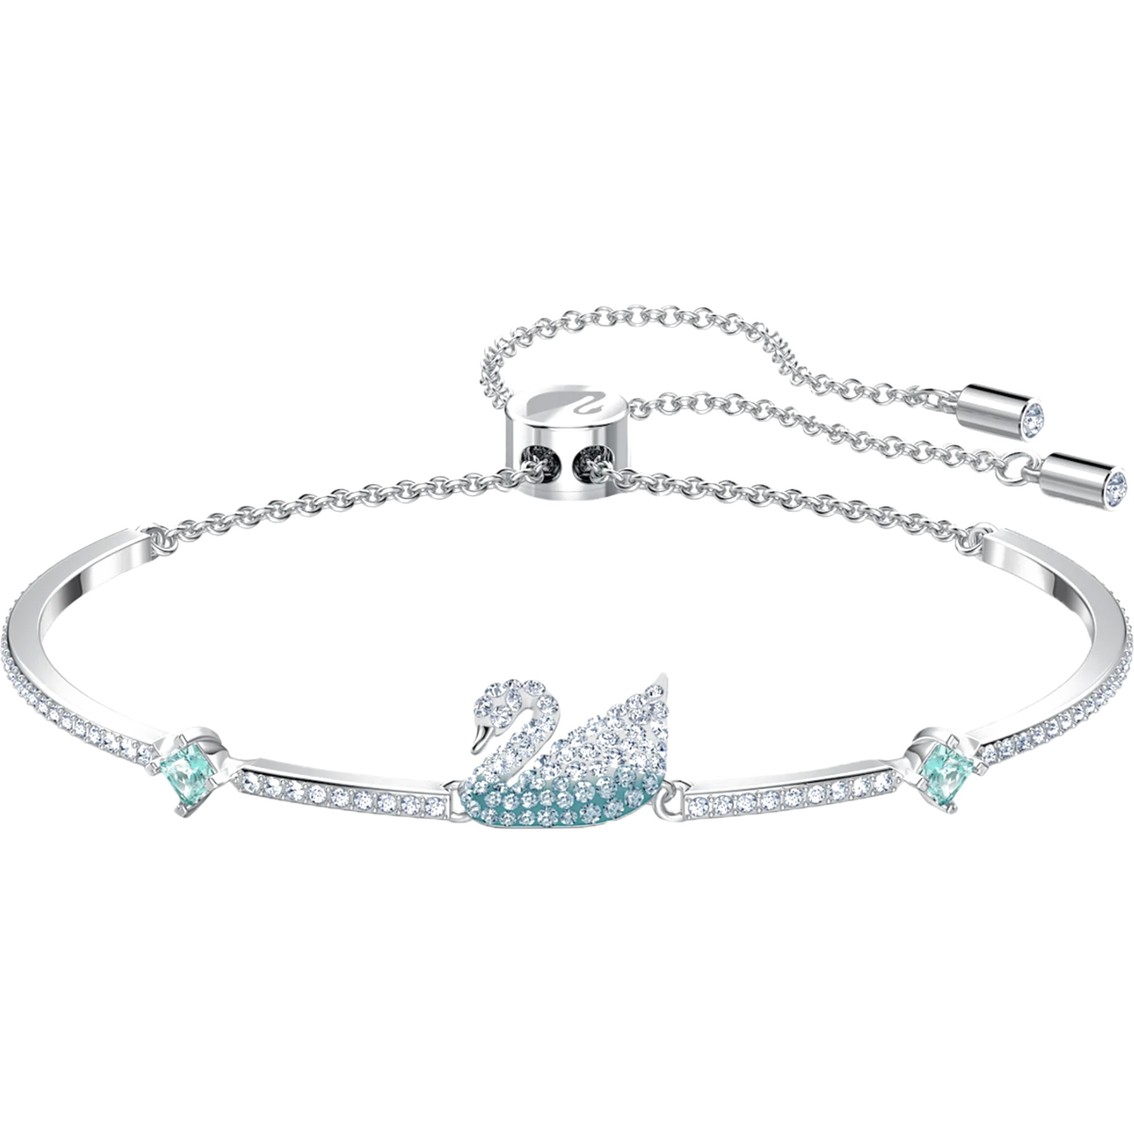 Iconic Swan Clear Crystal and Blue Crystal Bangle Bracelet